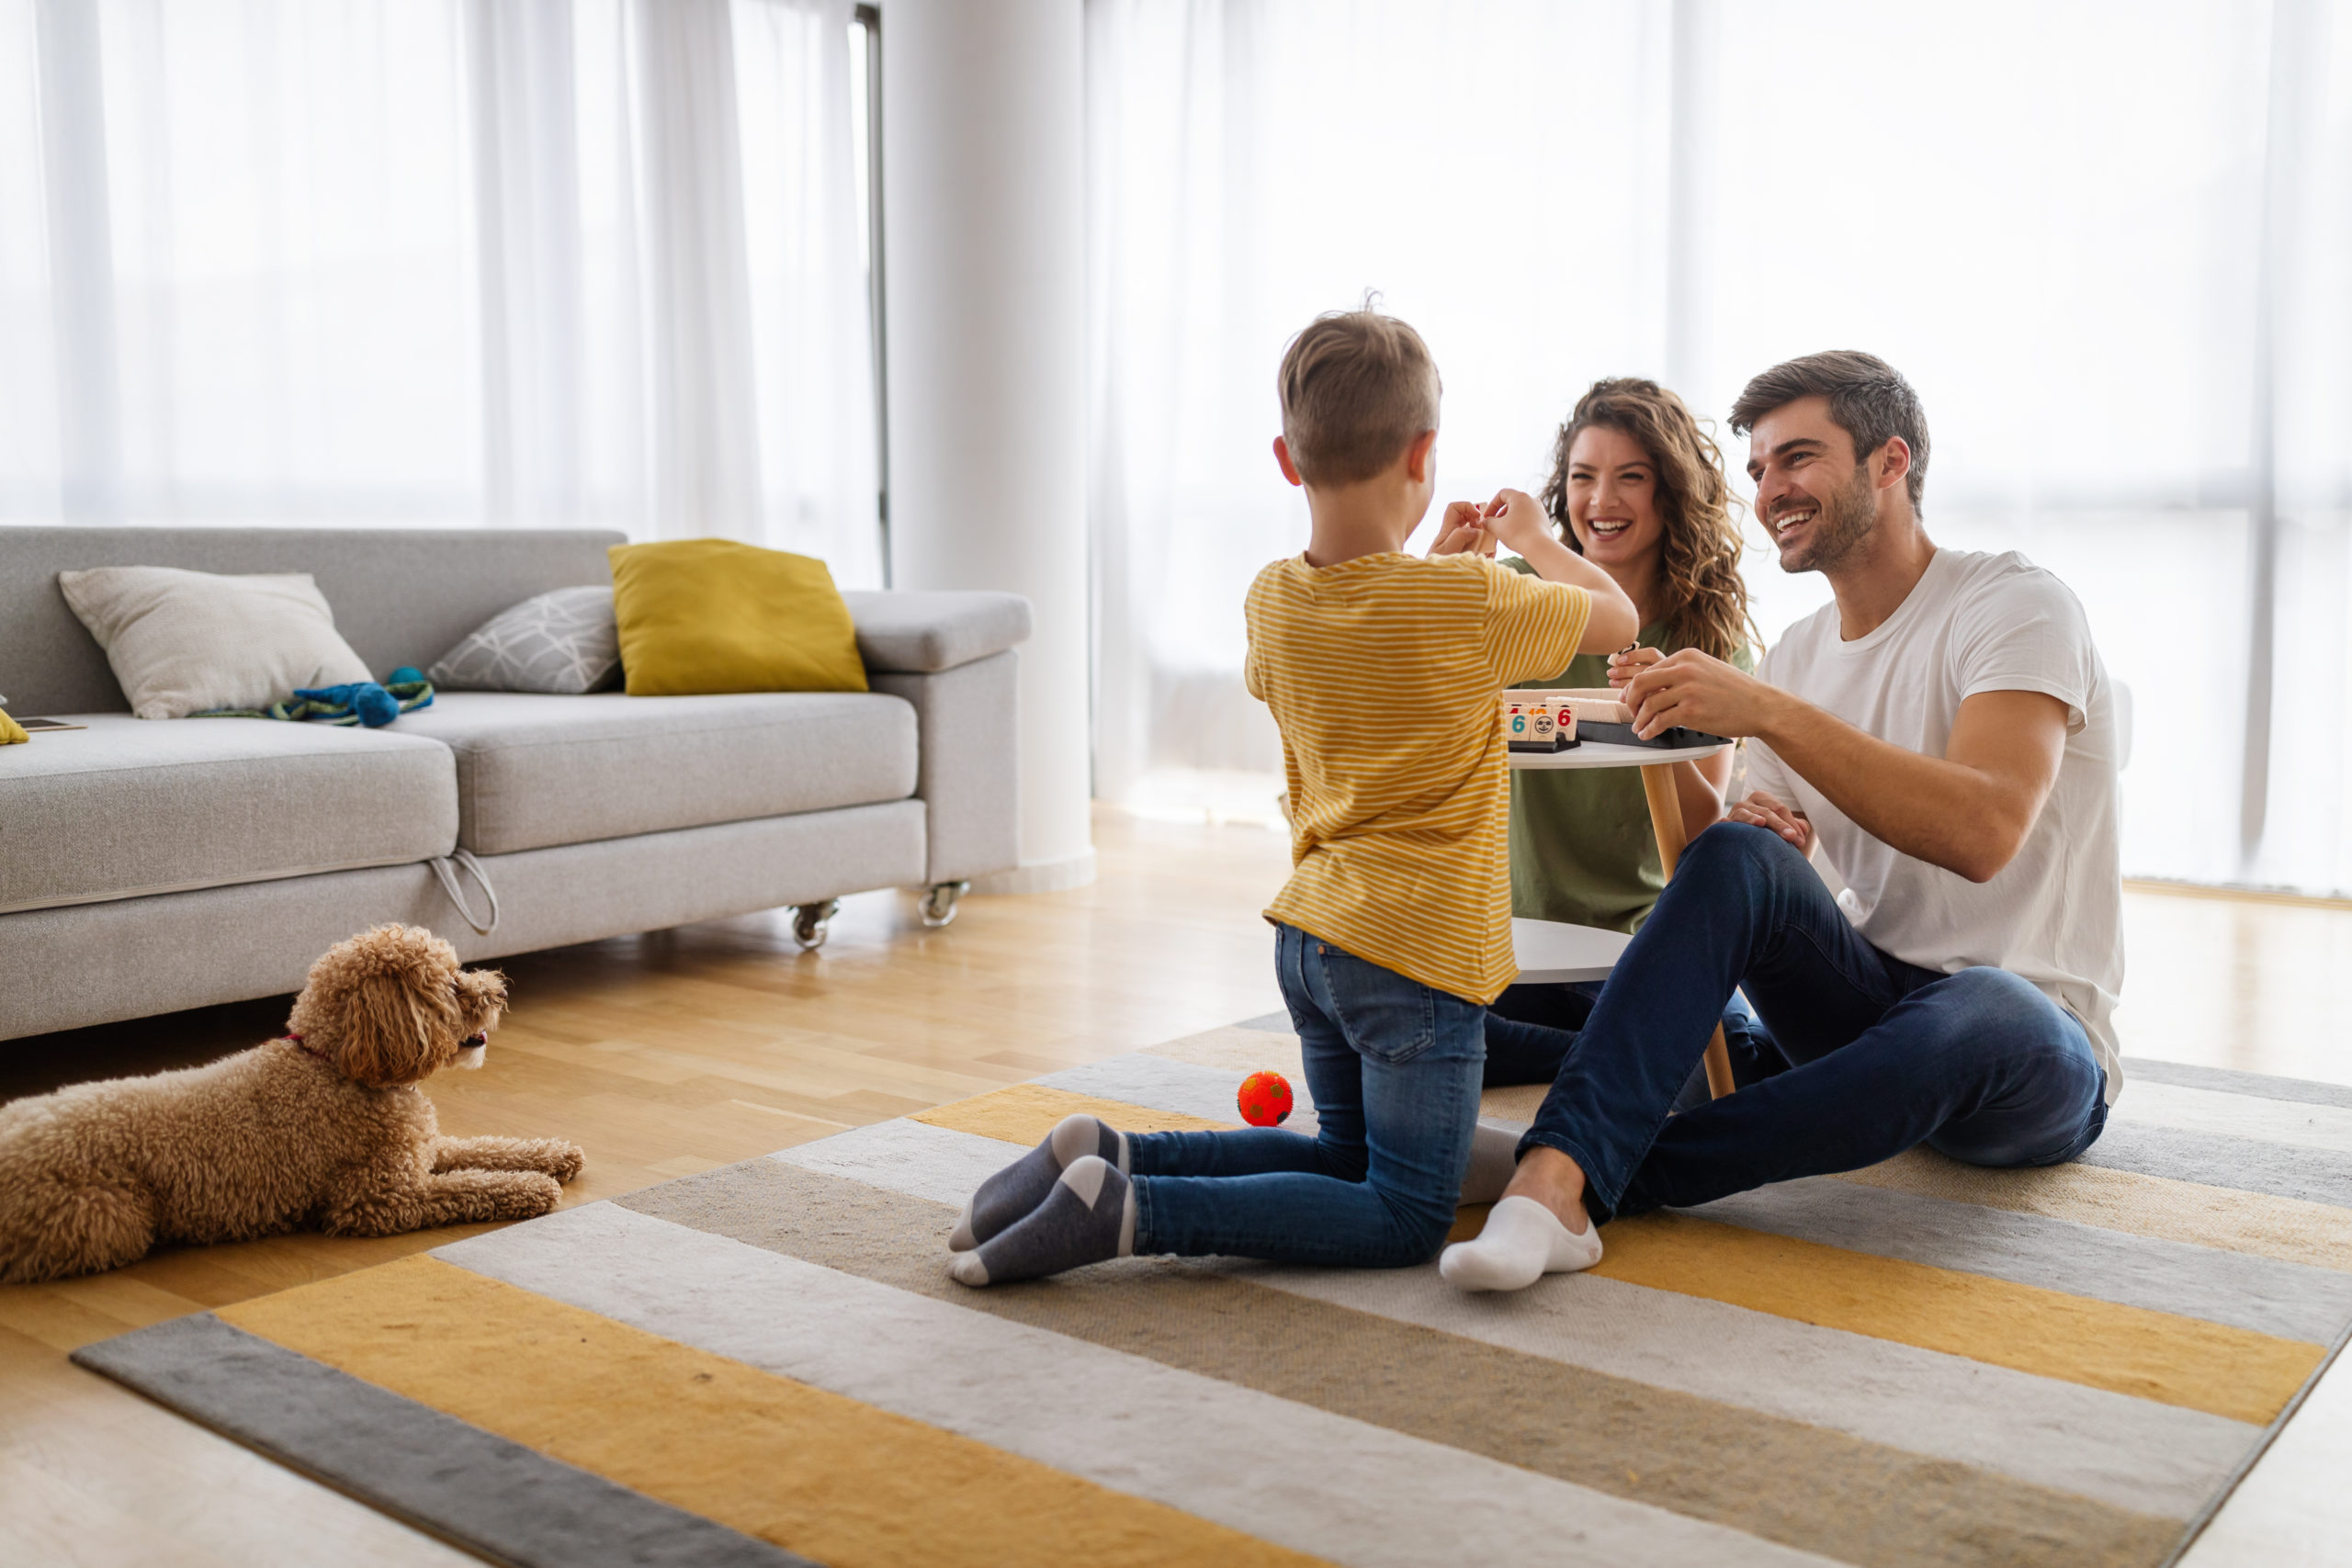 How to Design a Home Fit for the Whole Family